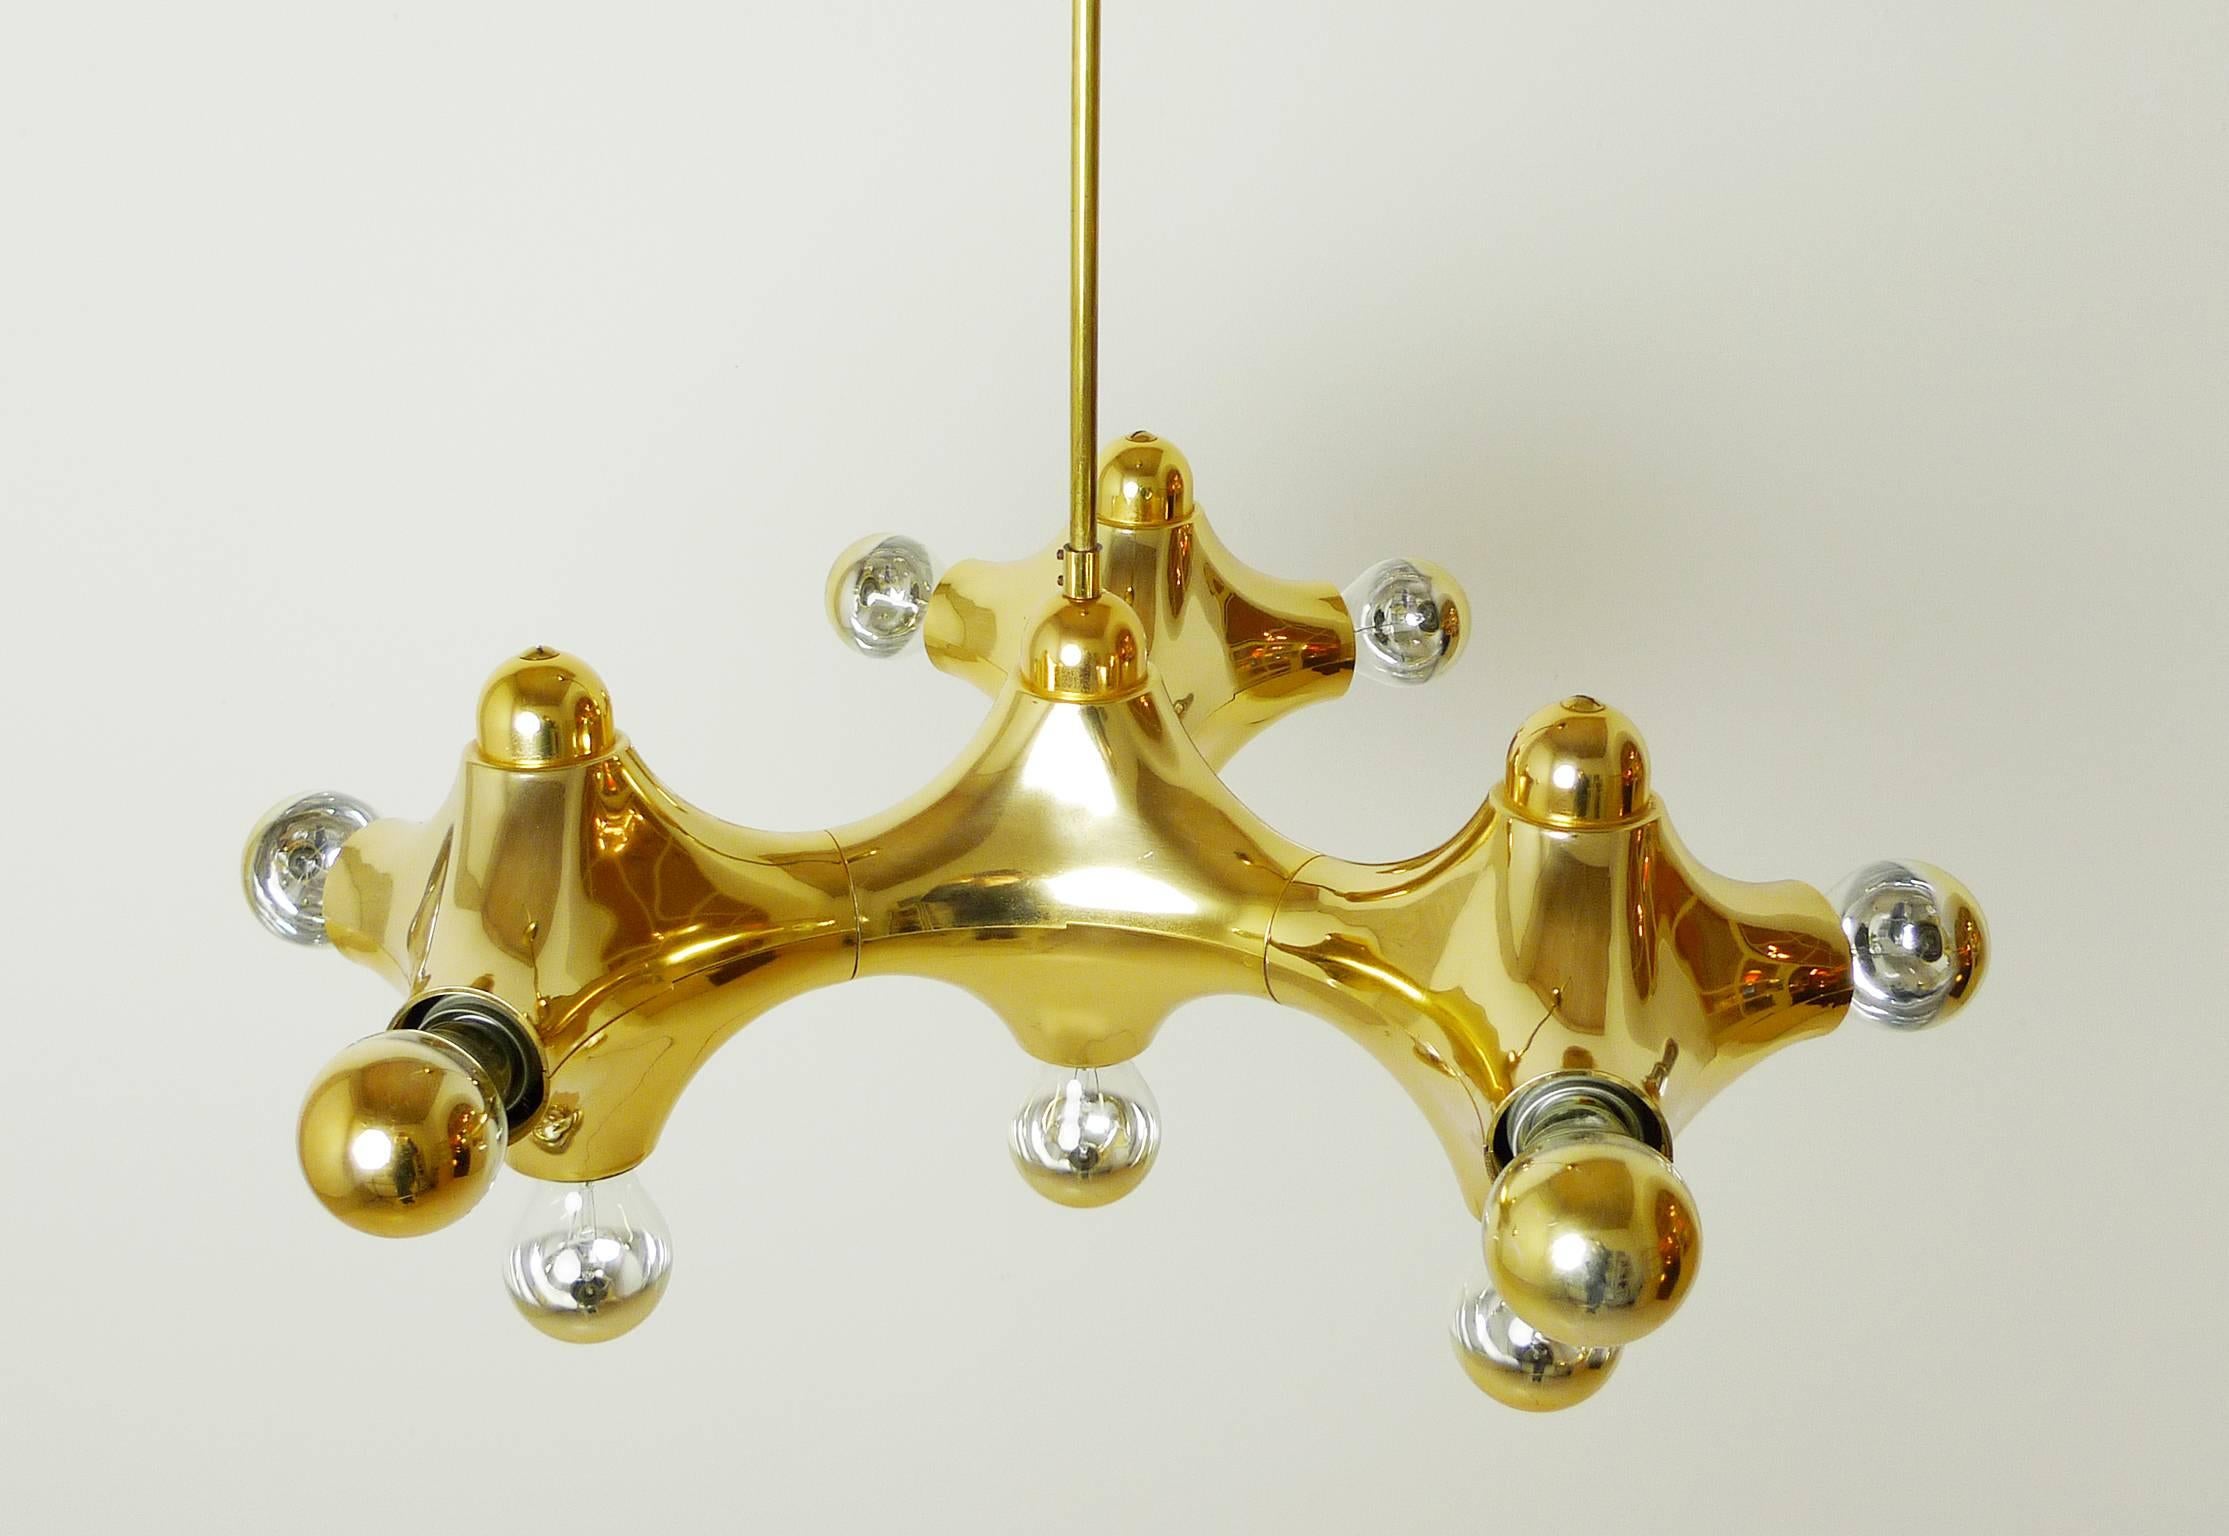 Golden pendant lamp with plastic body and ten bulb fittings for E 27 bulbs. Beautiful molecule design by Gebrüder Cosack in Germany from the 1970s. The pendant lamp is in very good condition.